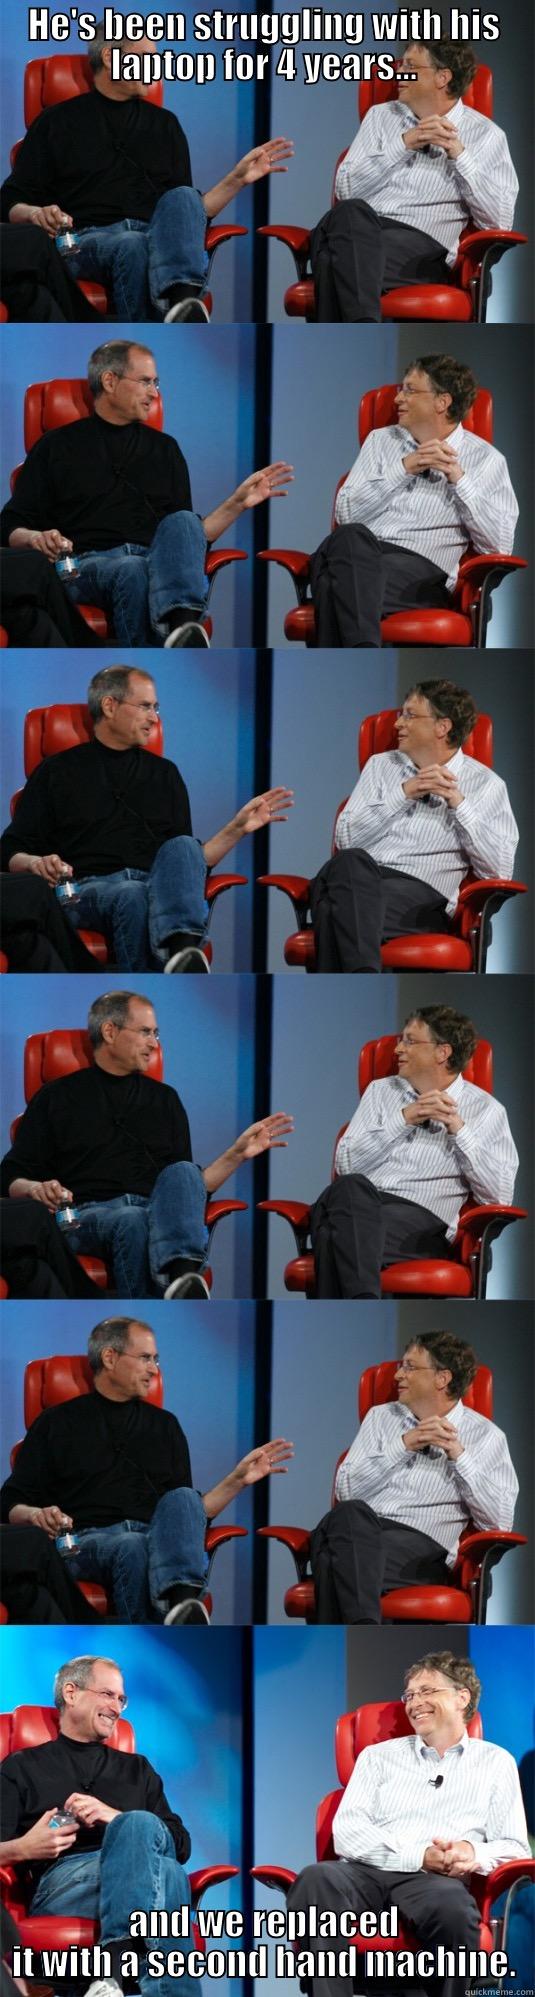 Hardware Policy - HE'S BEEN STRUGGLING WITH HIS LAPTOP FOR 4 YEARS... AND WE REPLACED IT WITH A SECOND HAND MACHINE. Steve Jobs vs Bill Gates